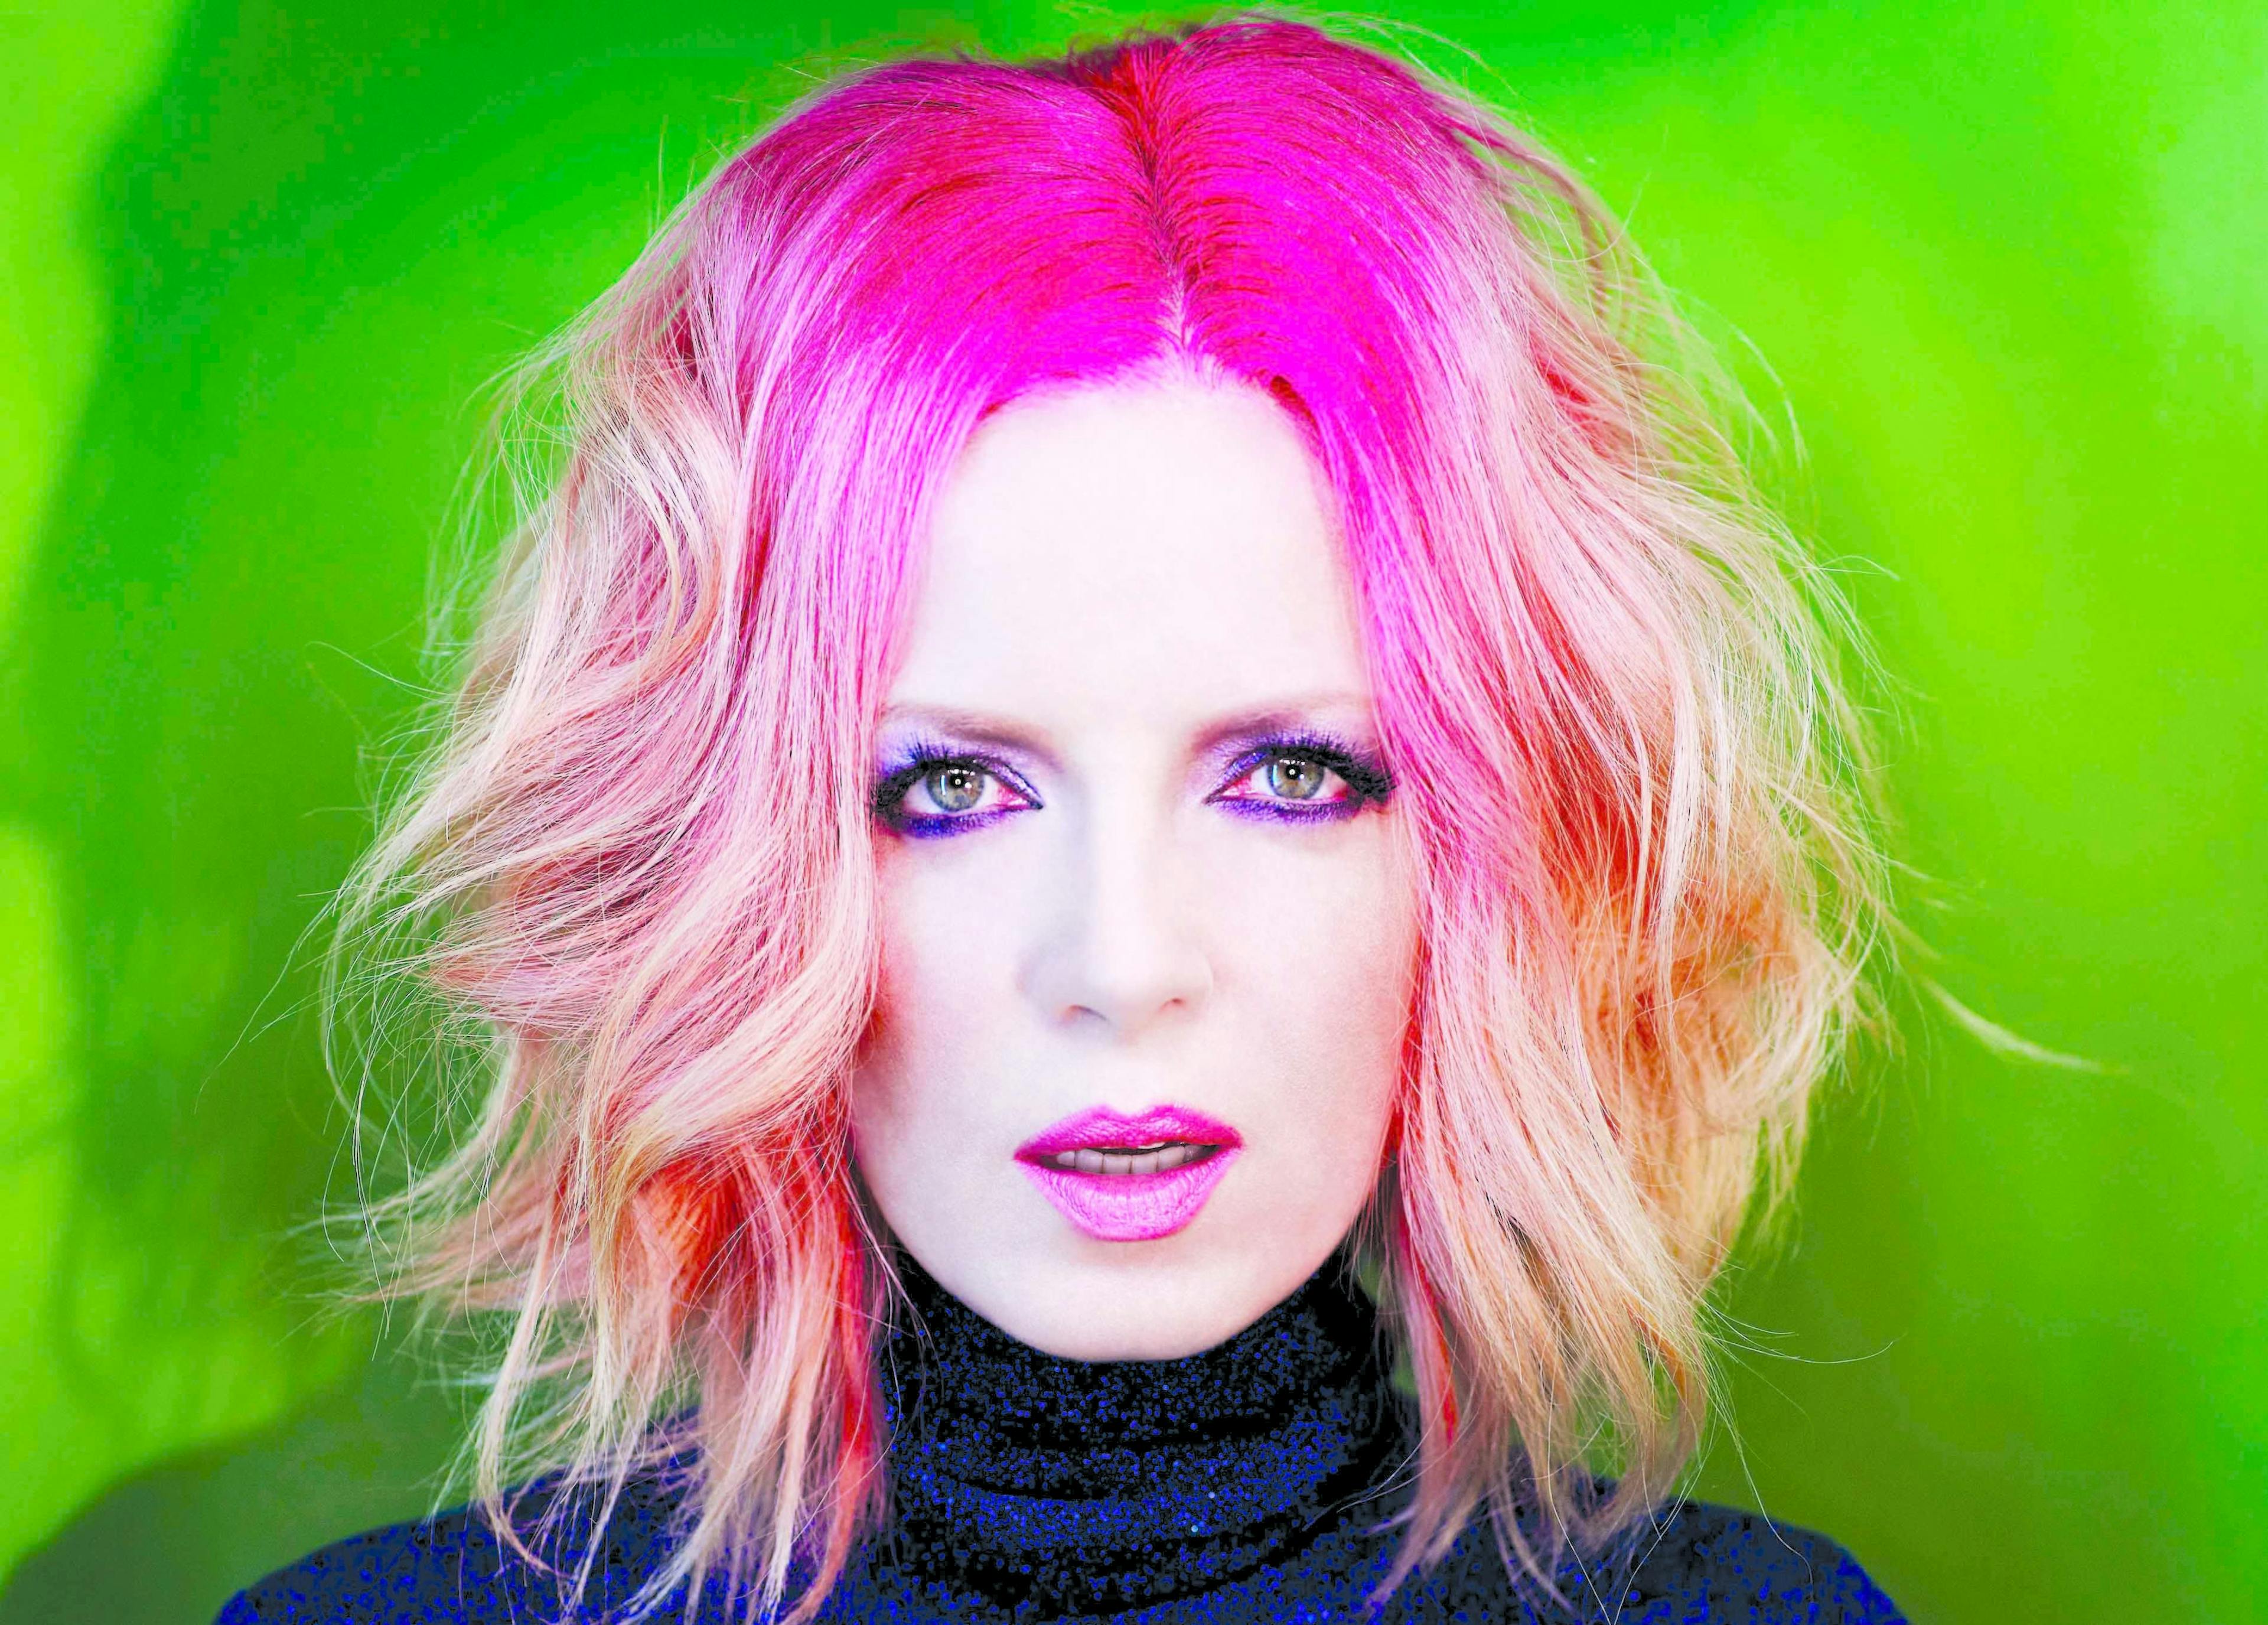 "When The World Gets Scared, The First People They Punish Are The Women" – Shirley Manson